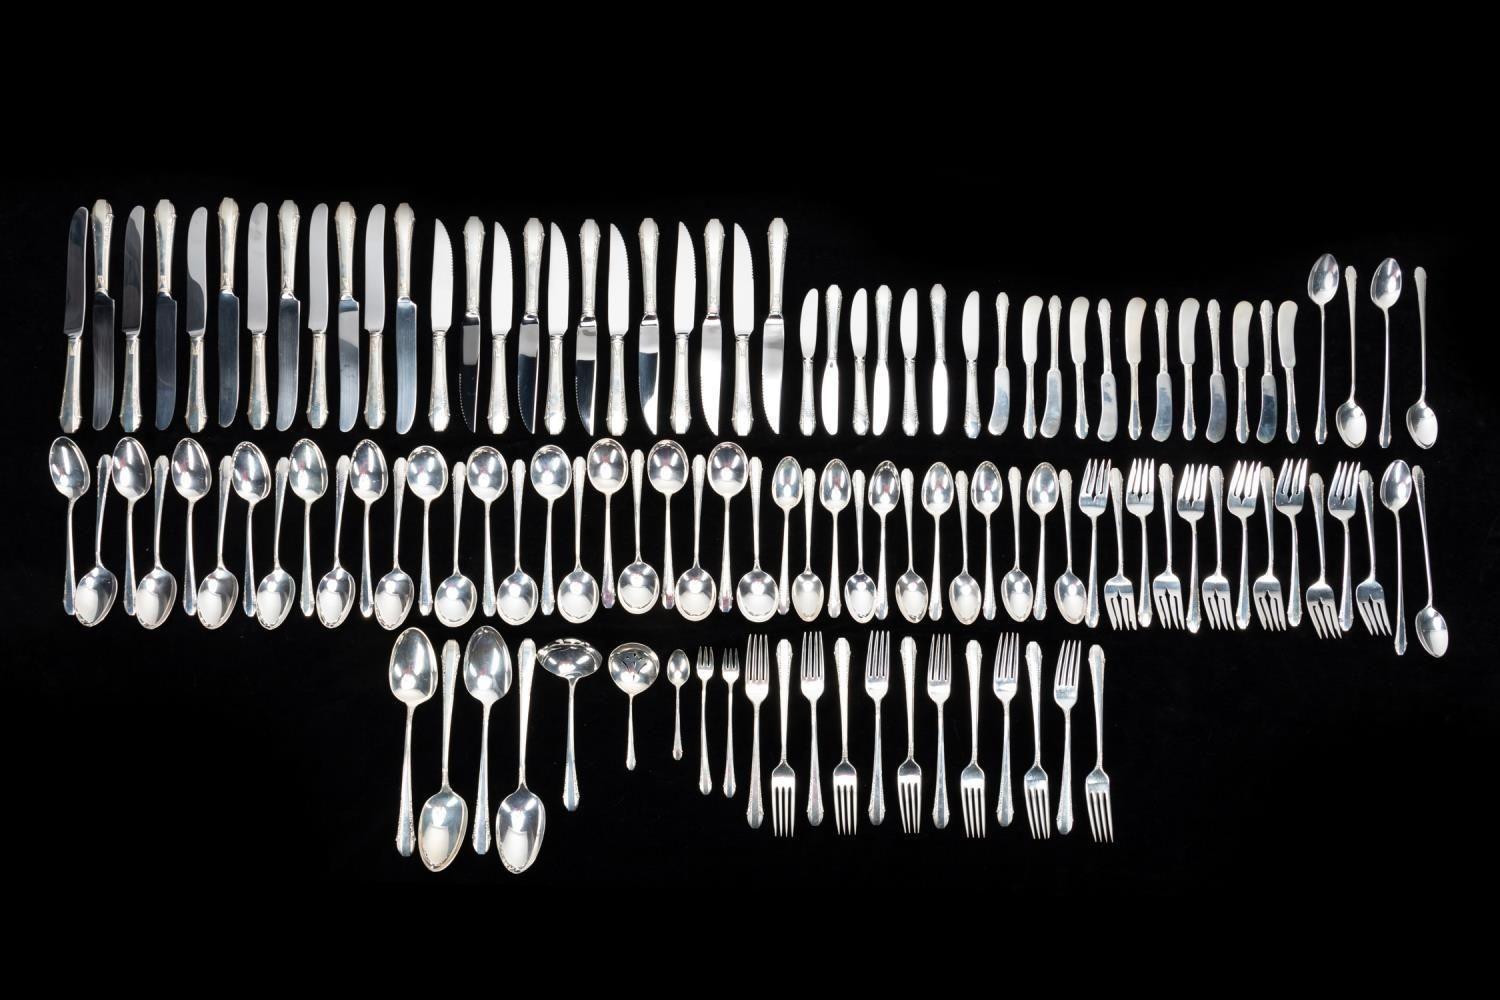 118 piece silverware set by International Silver for the 